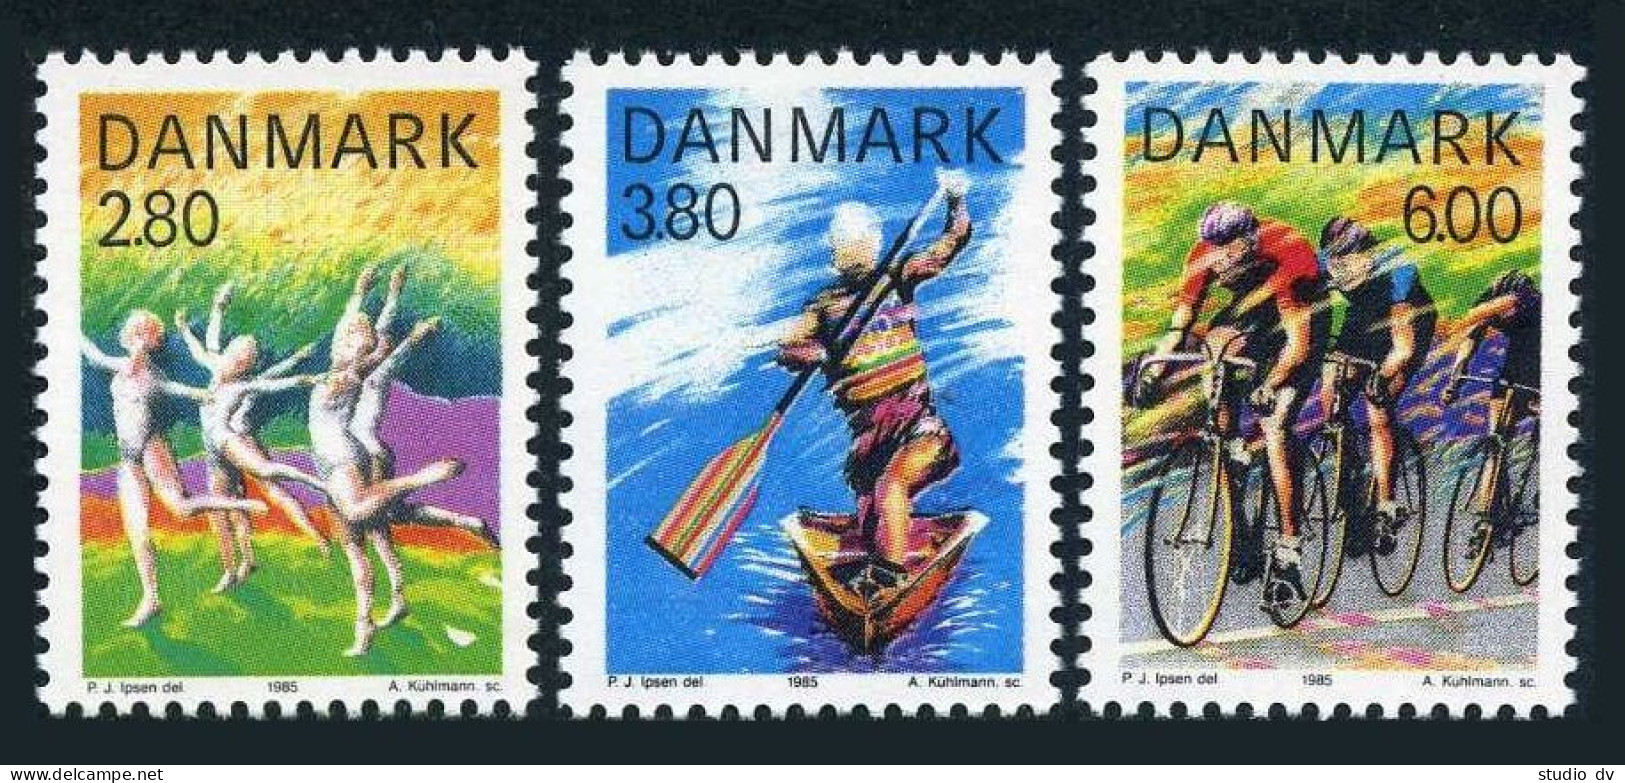 Denmark 780-782, MNH. Michel 842-844. Sports 1985. Canoe & Kayak, Cycling. - Unused Stamps